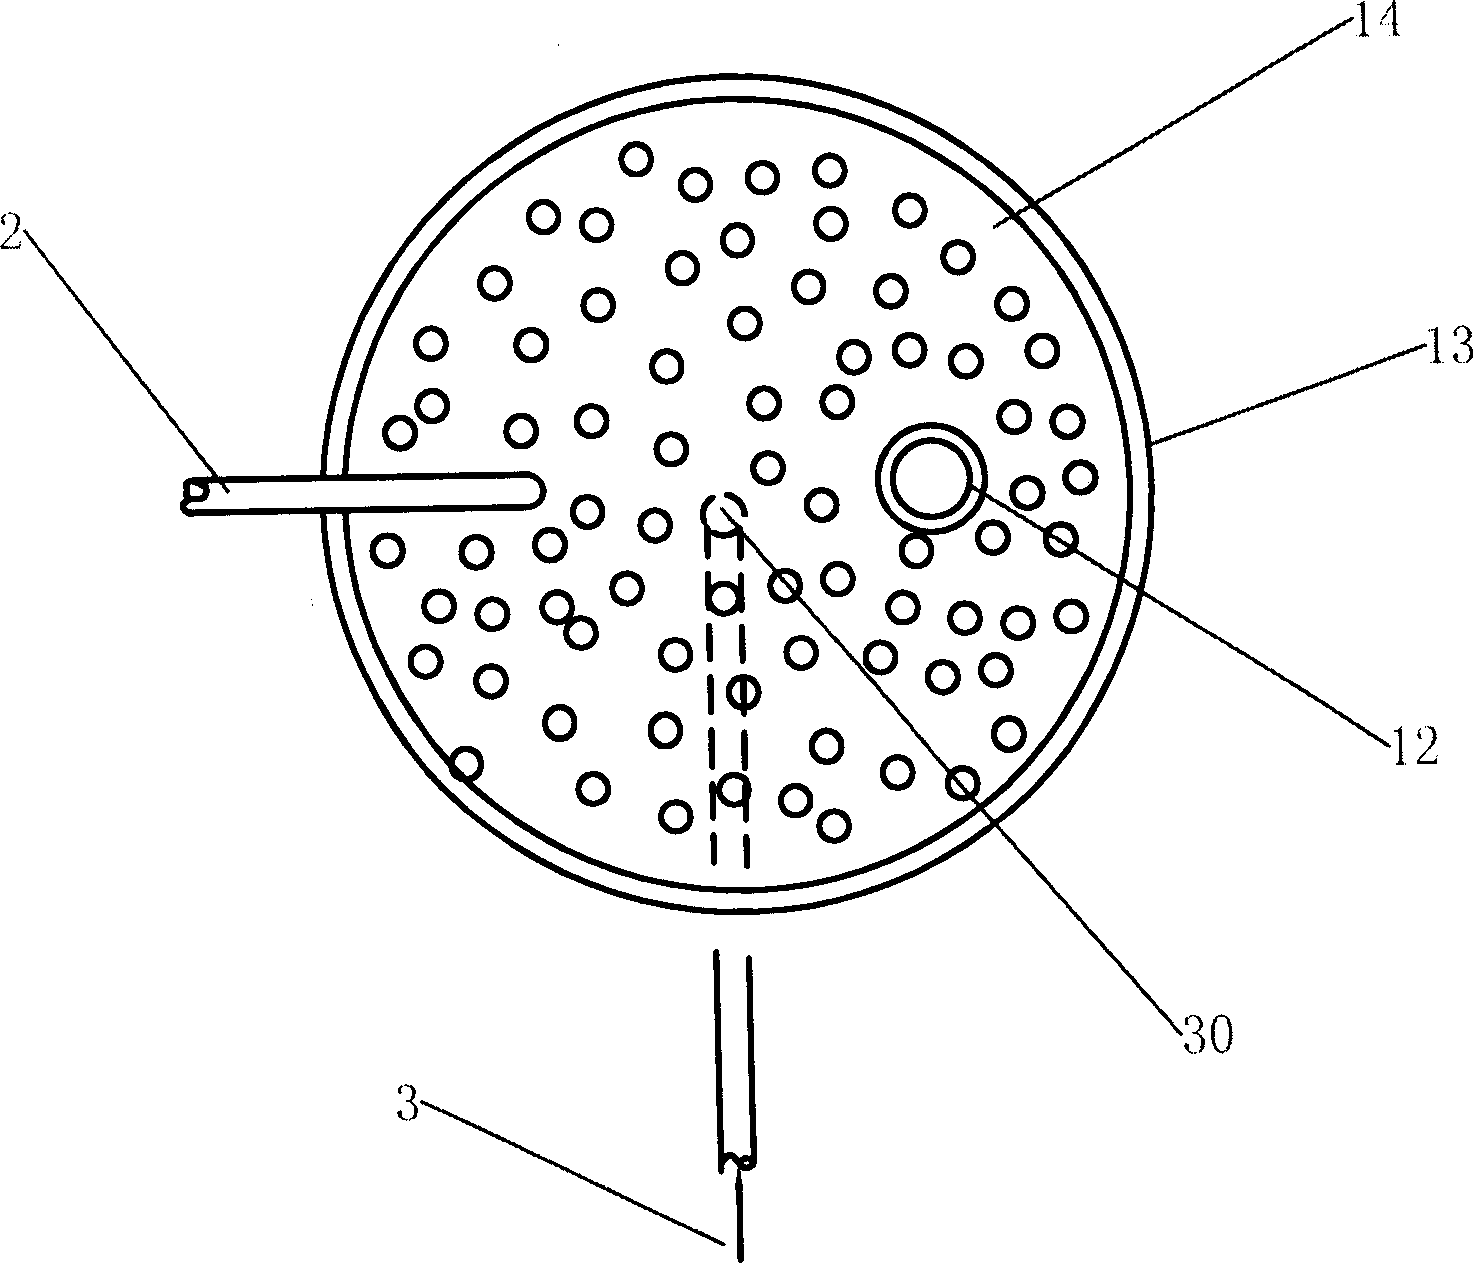 Method and apparatus for catalytic modification of poor gasoline